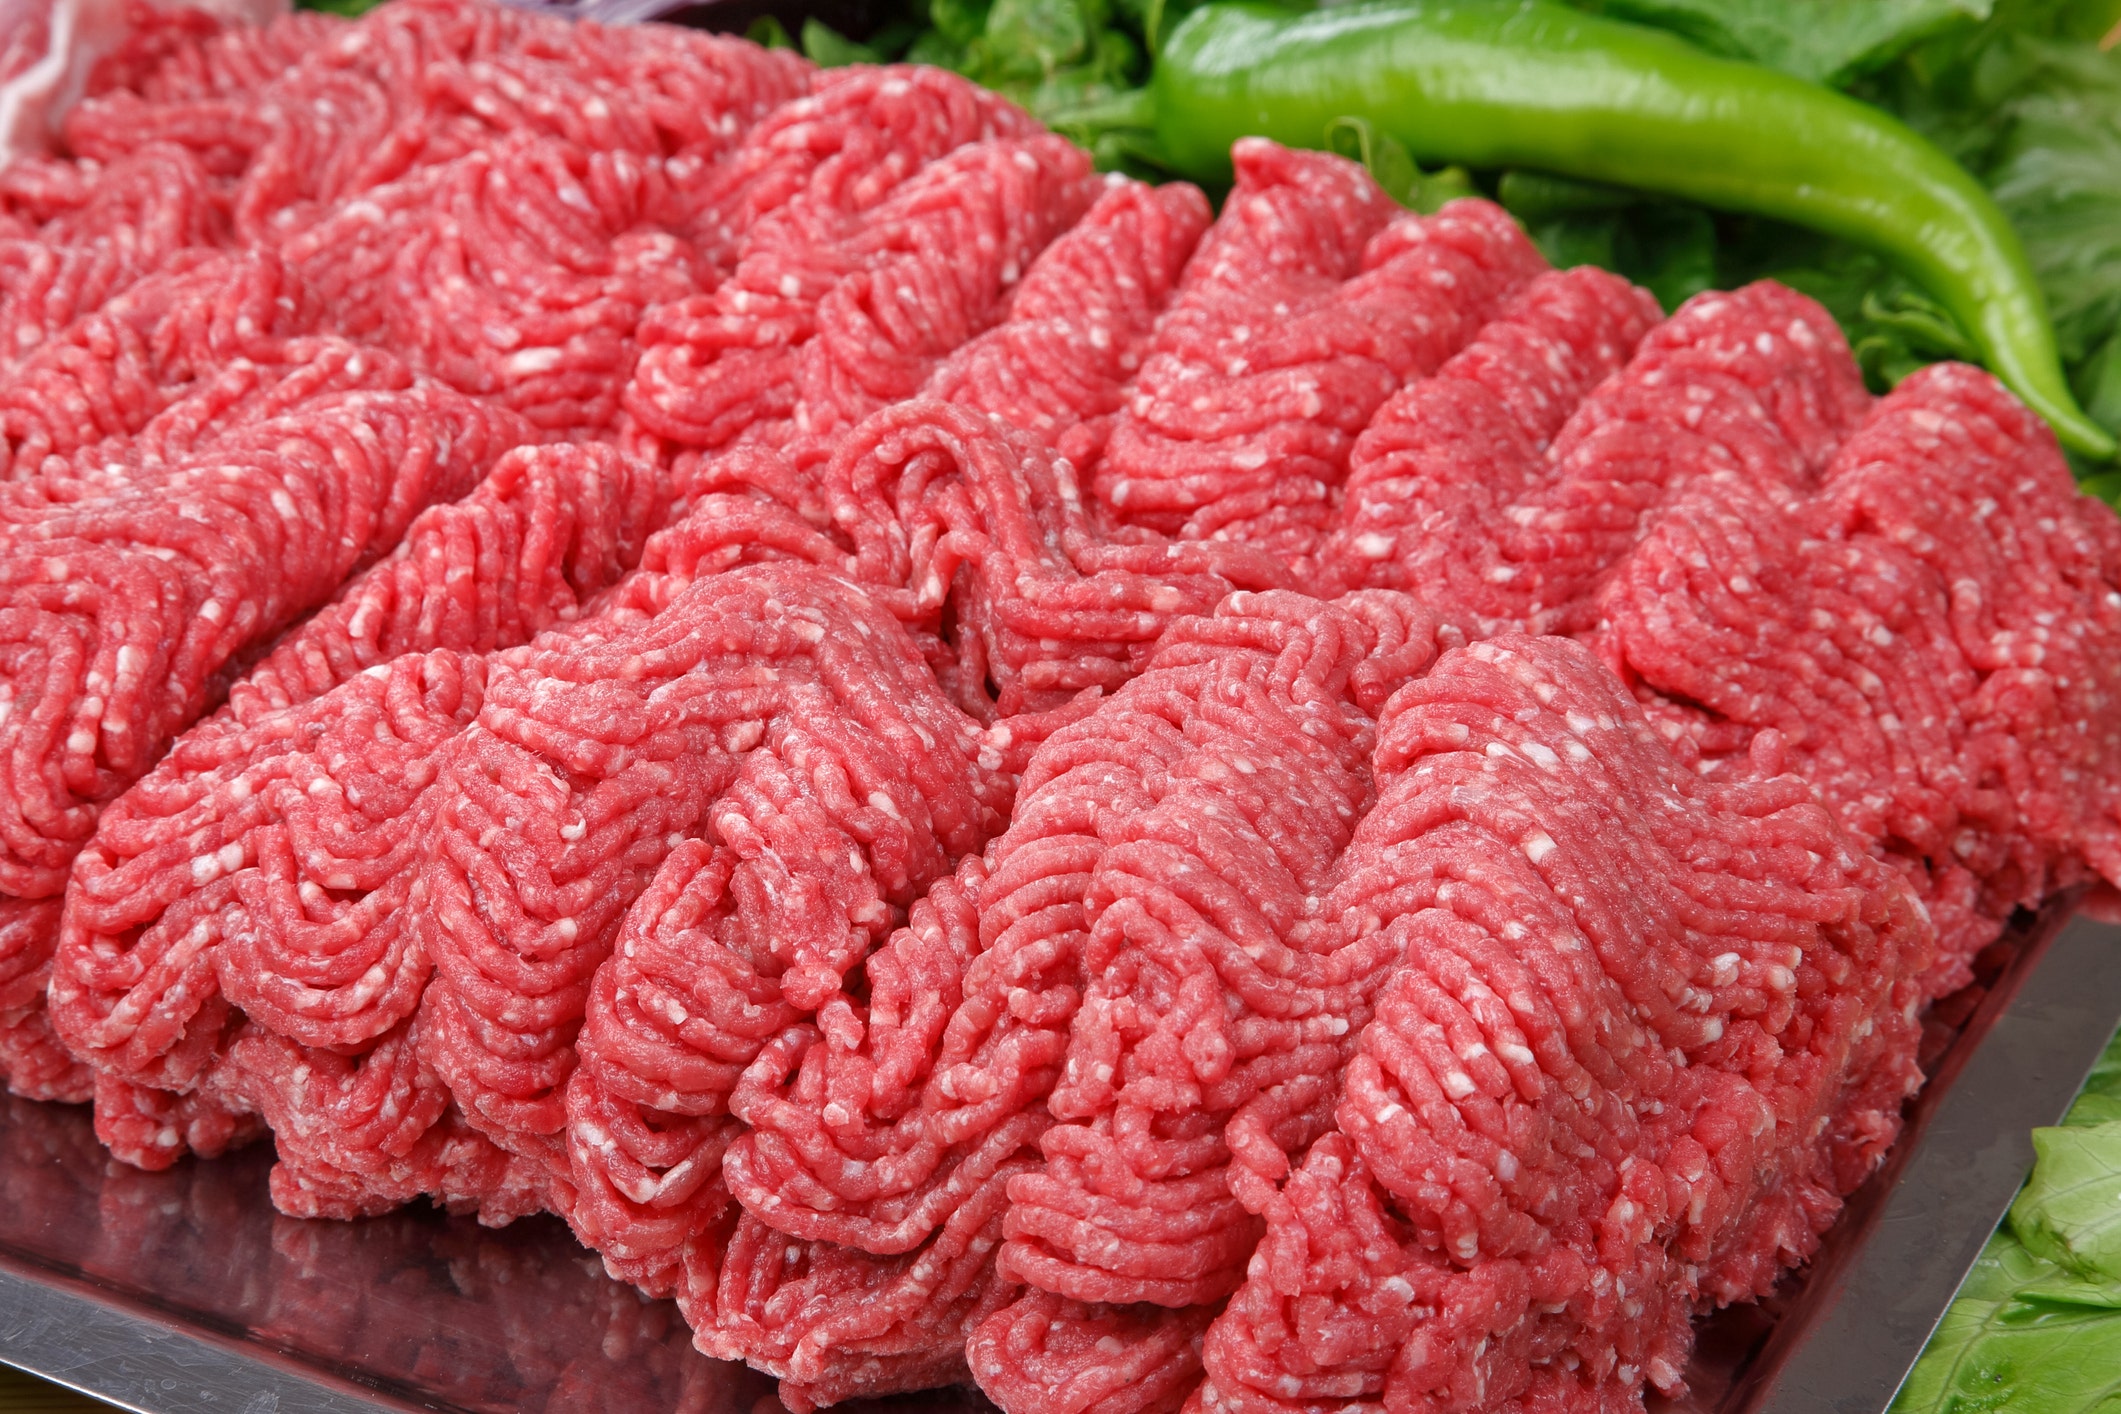 Over 42,000 pounds of ground beef recalled over E. coli concerns News